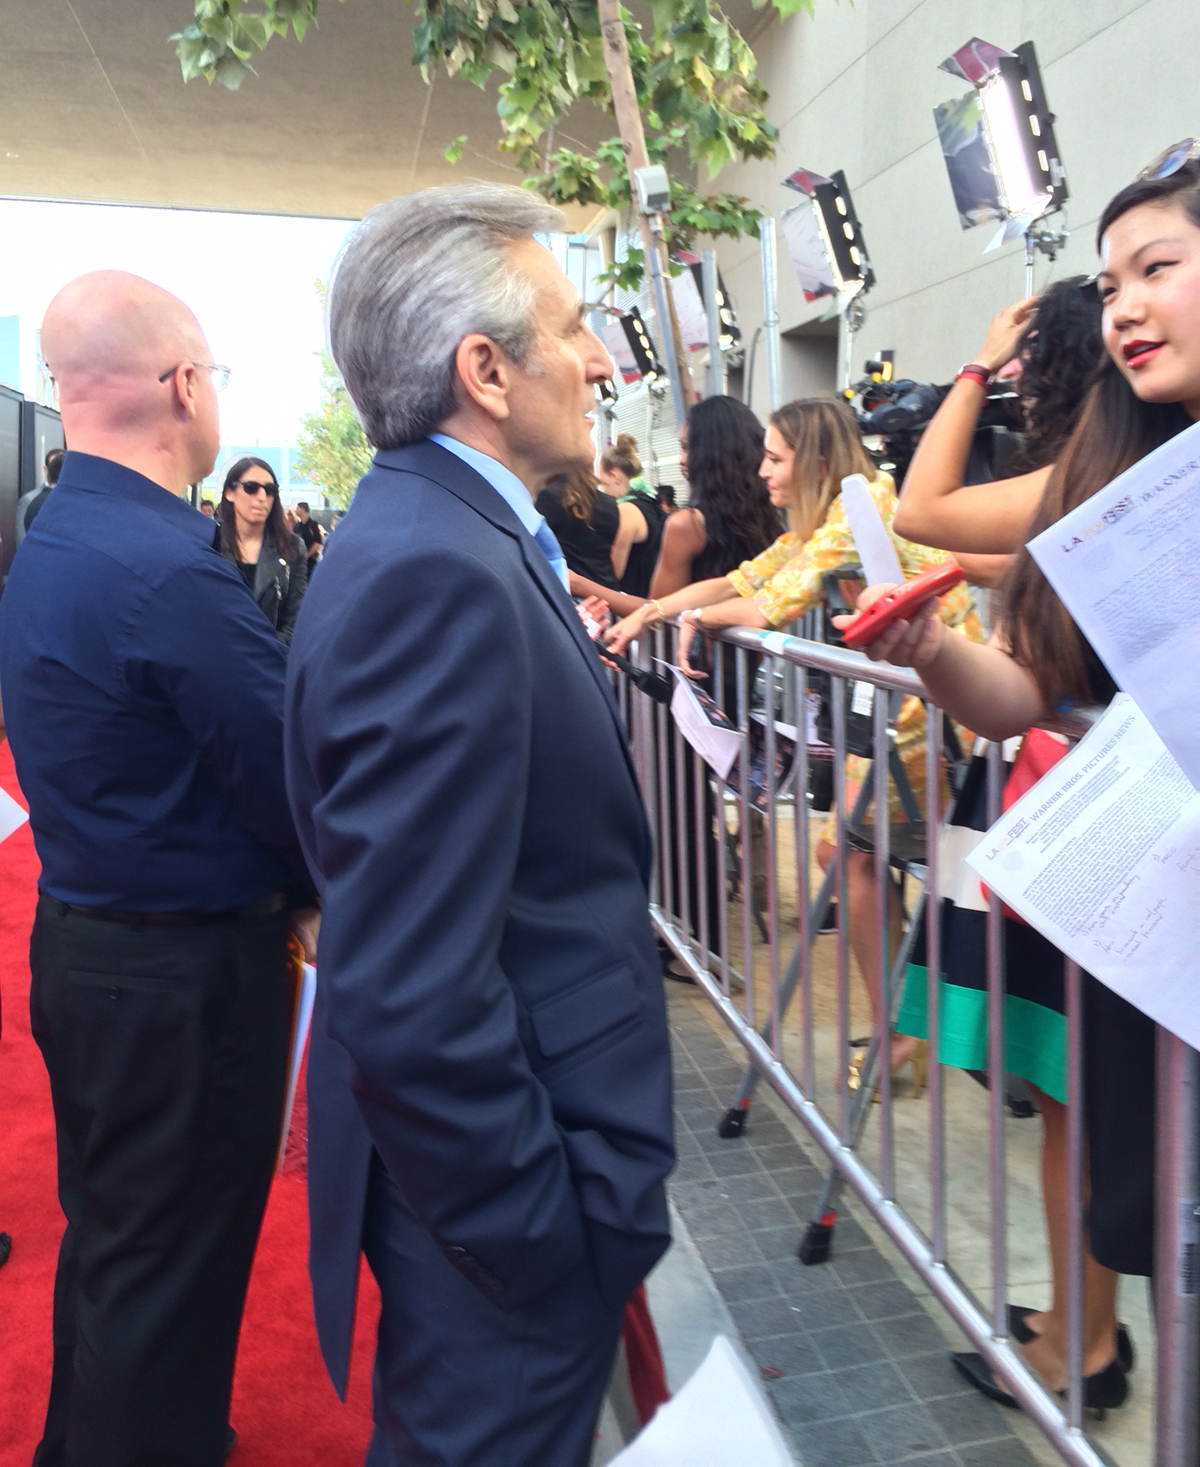 Lou Volpe being interviewed on red carpet for the Jersey Boys movie premiere.